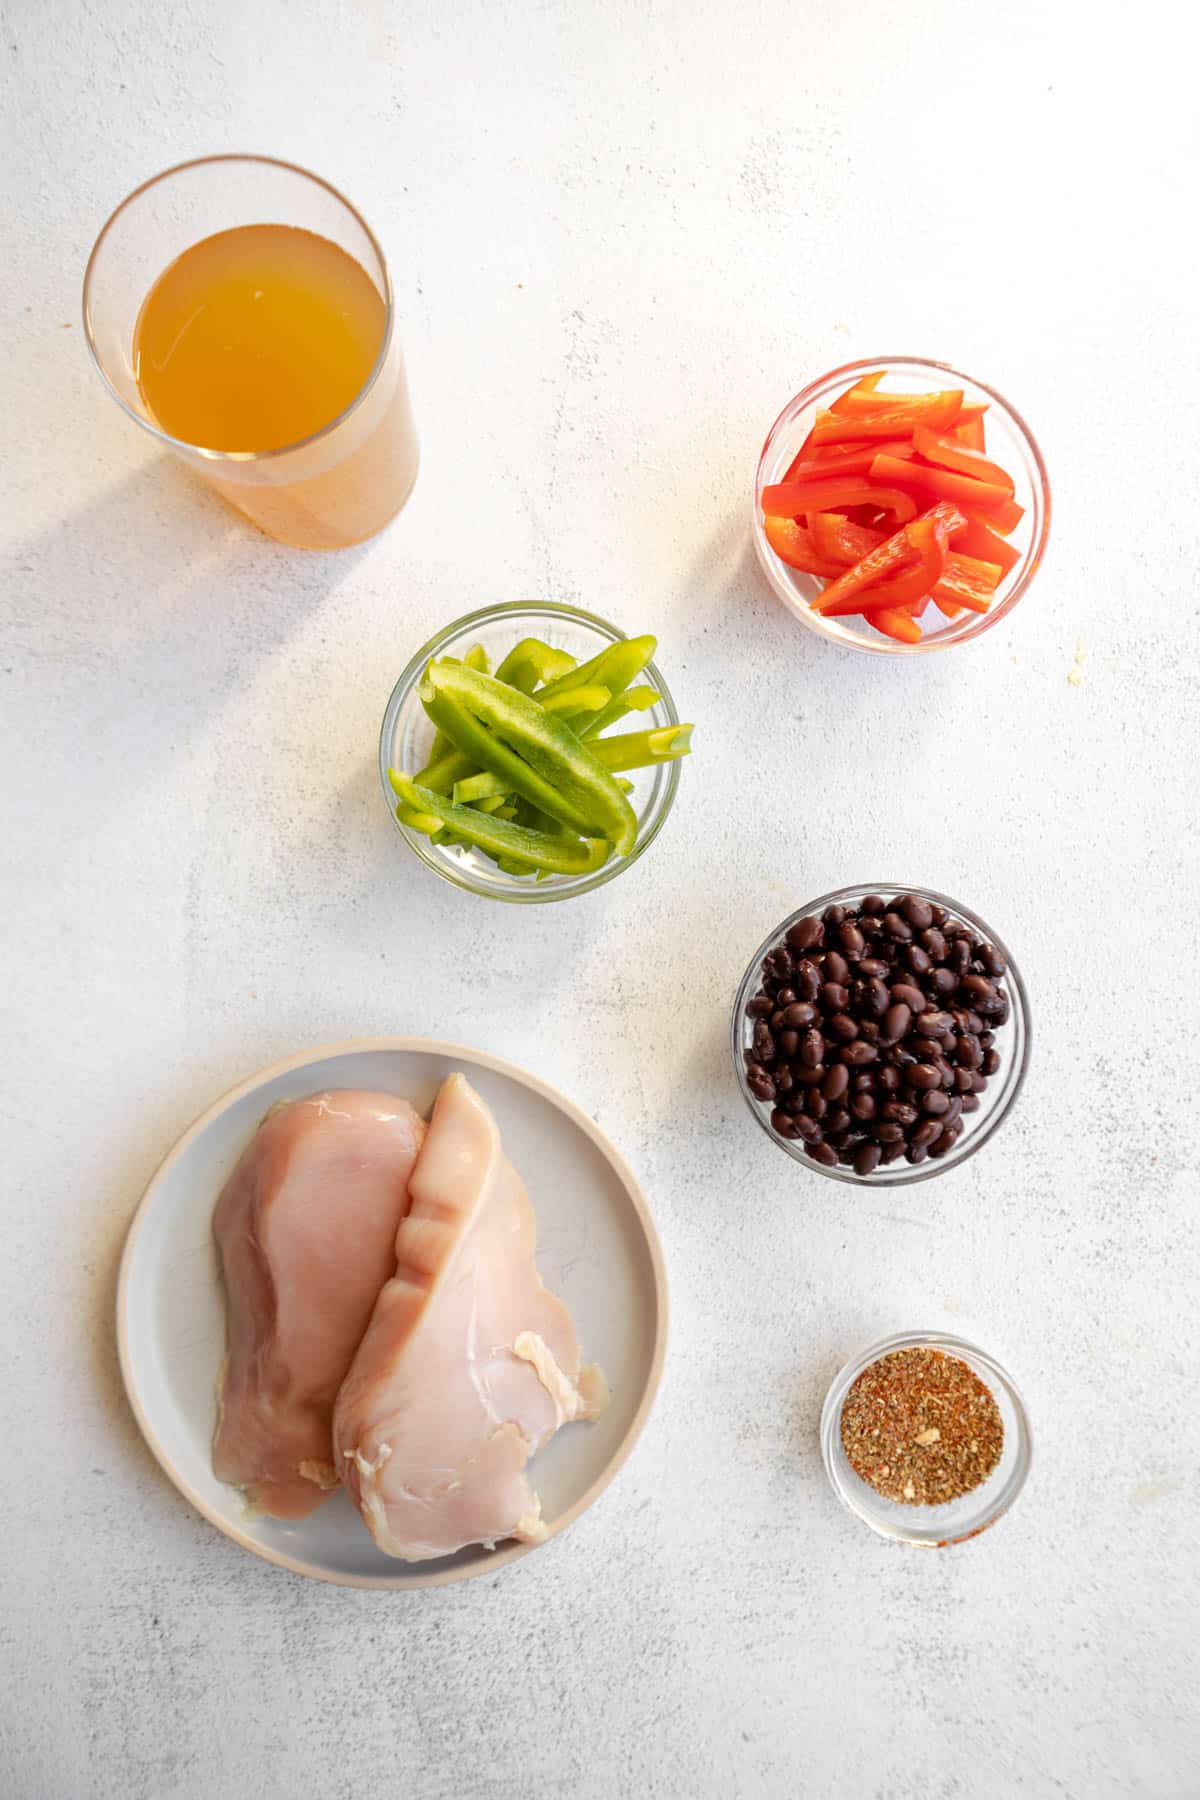 Ingredients to make slow cooker chicken taco bowls on the table before making.